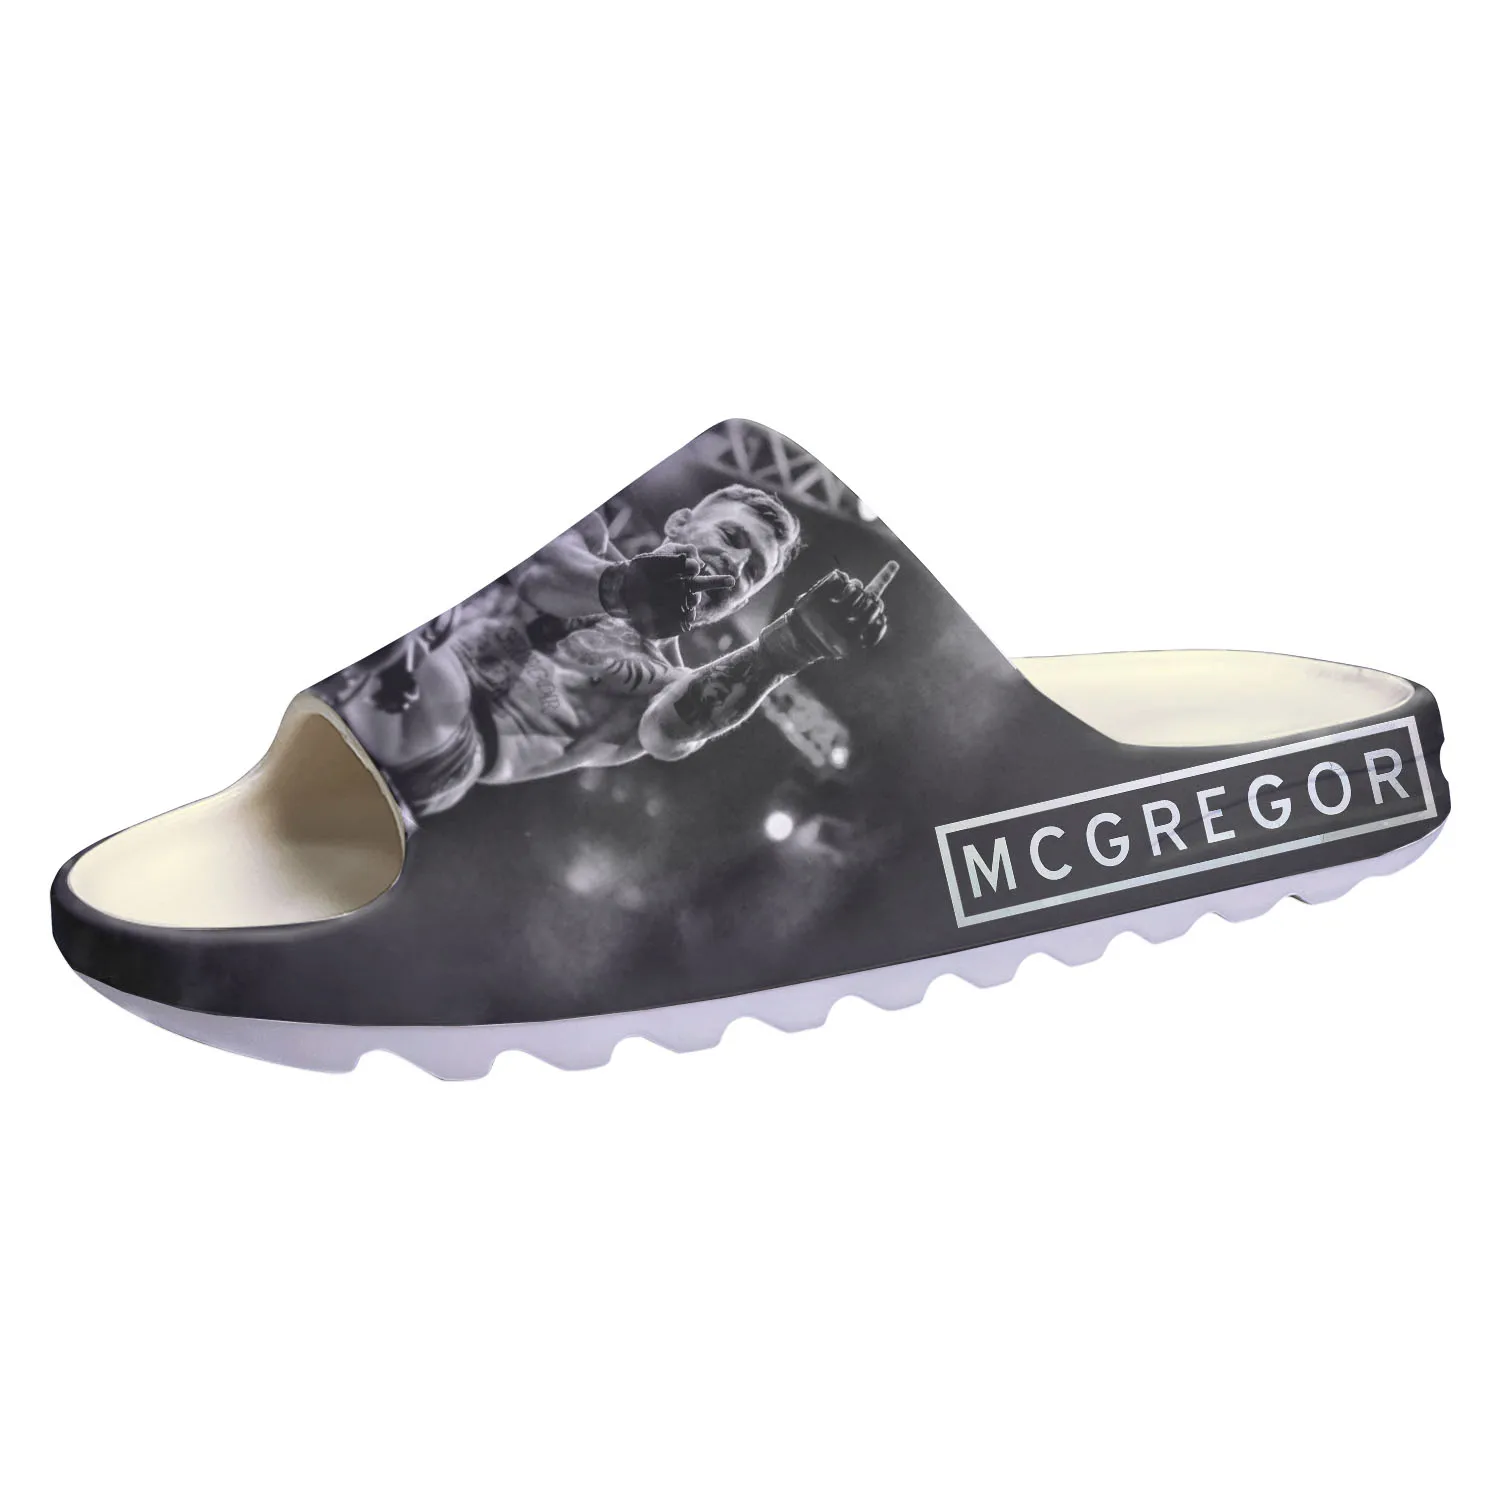 

Conor McGregor Notorious Men Fans Soft Sole Sllipers Home Clogs Customized Step On Water Shoes Mens Womens Teenager Sandals